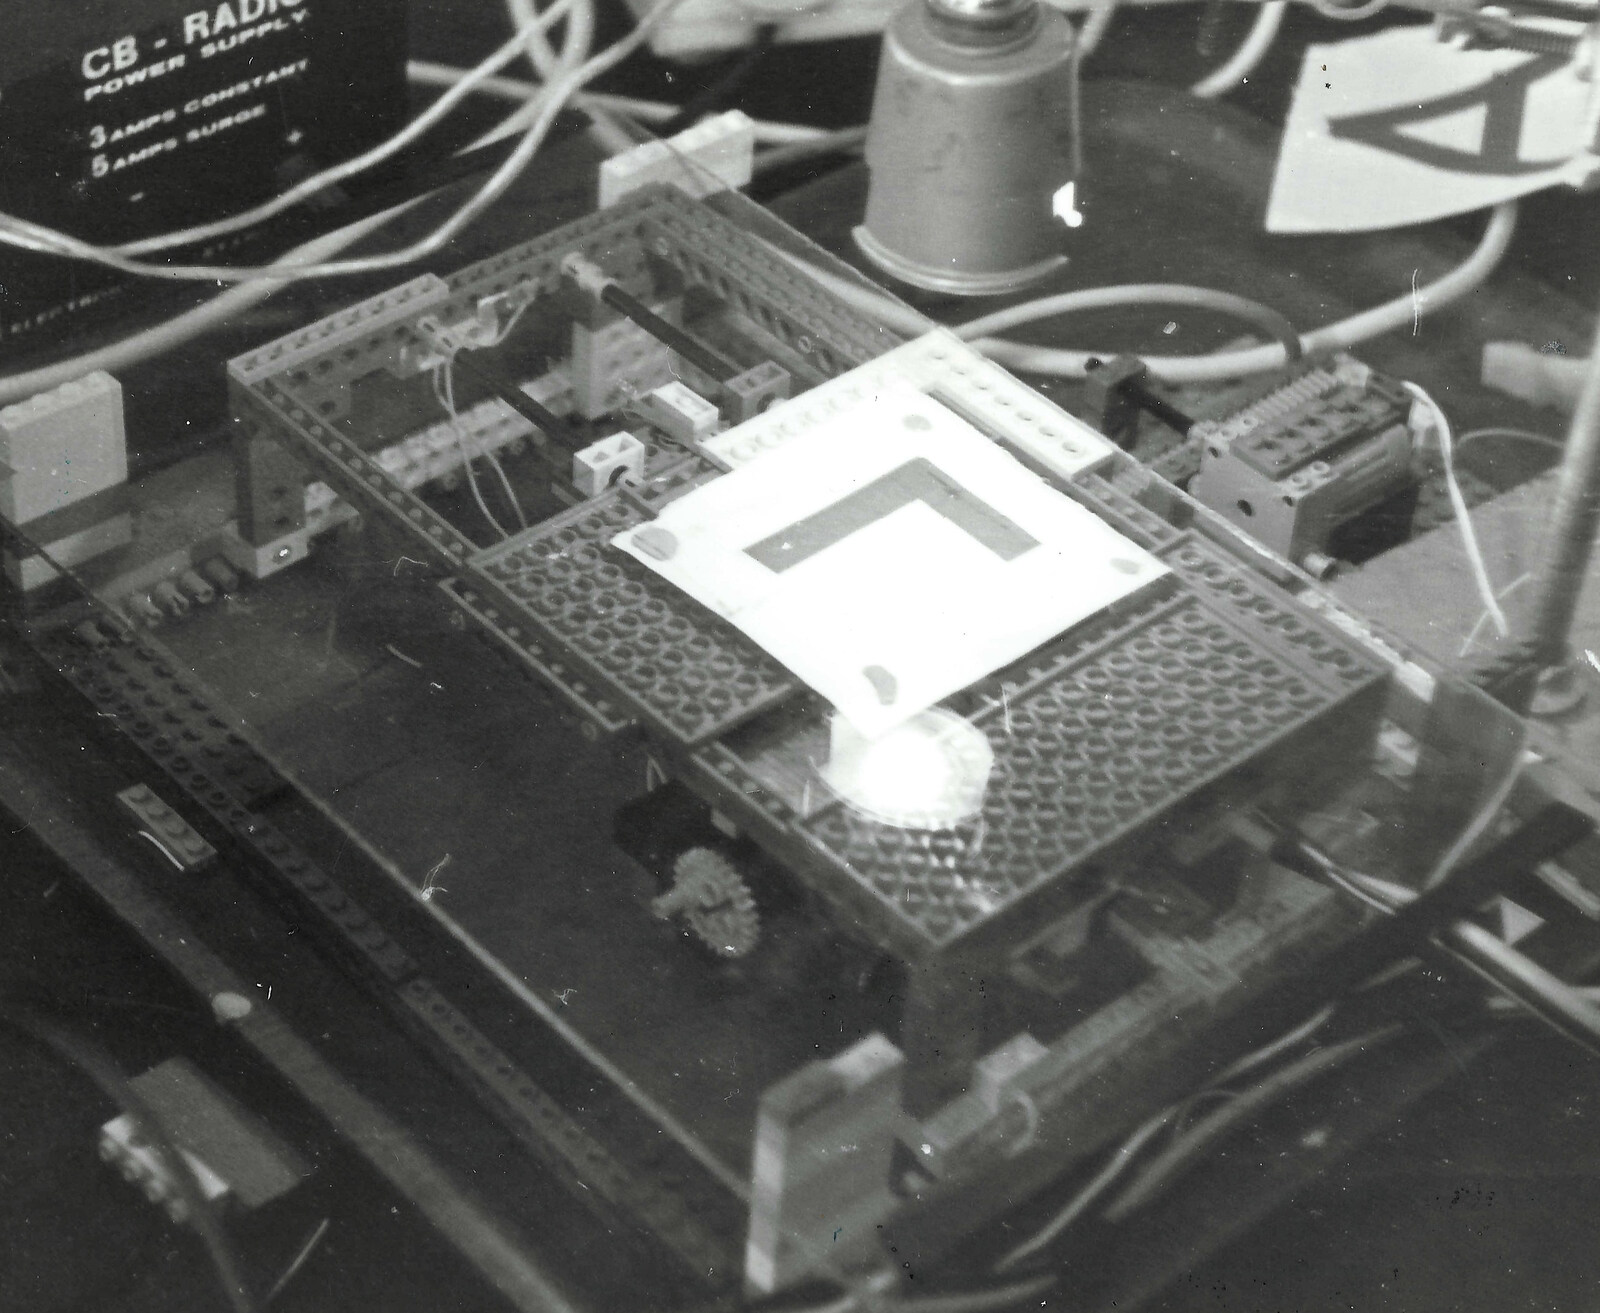 Nosher's Lego fax machine science project from Learning Black-and-White Photography, Brockenhurst College, Hampshire - 10th March 1985